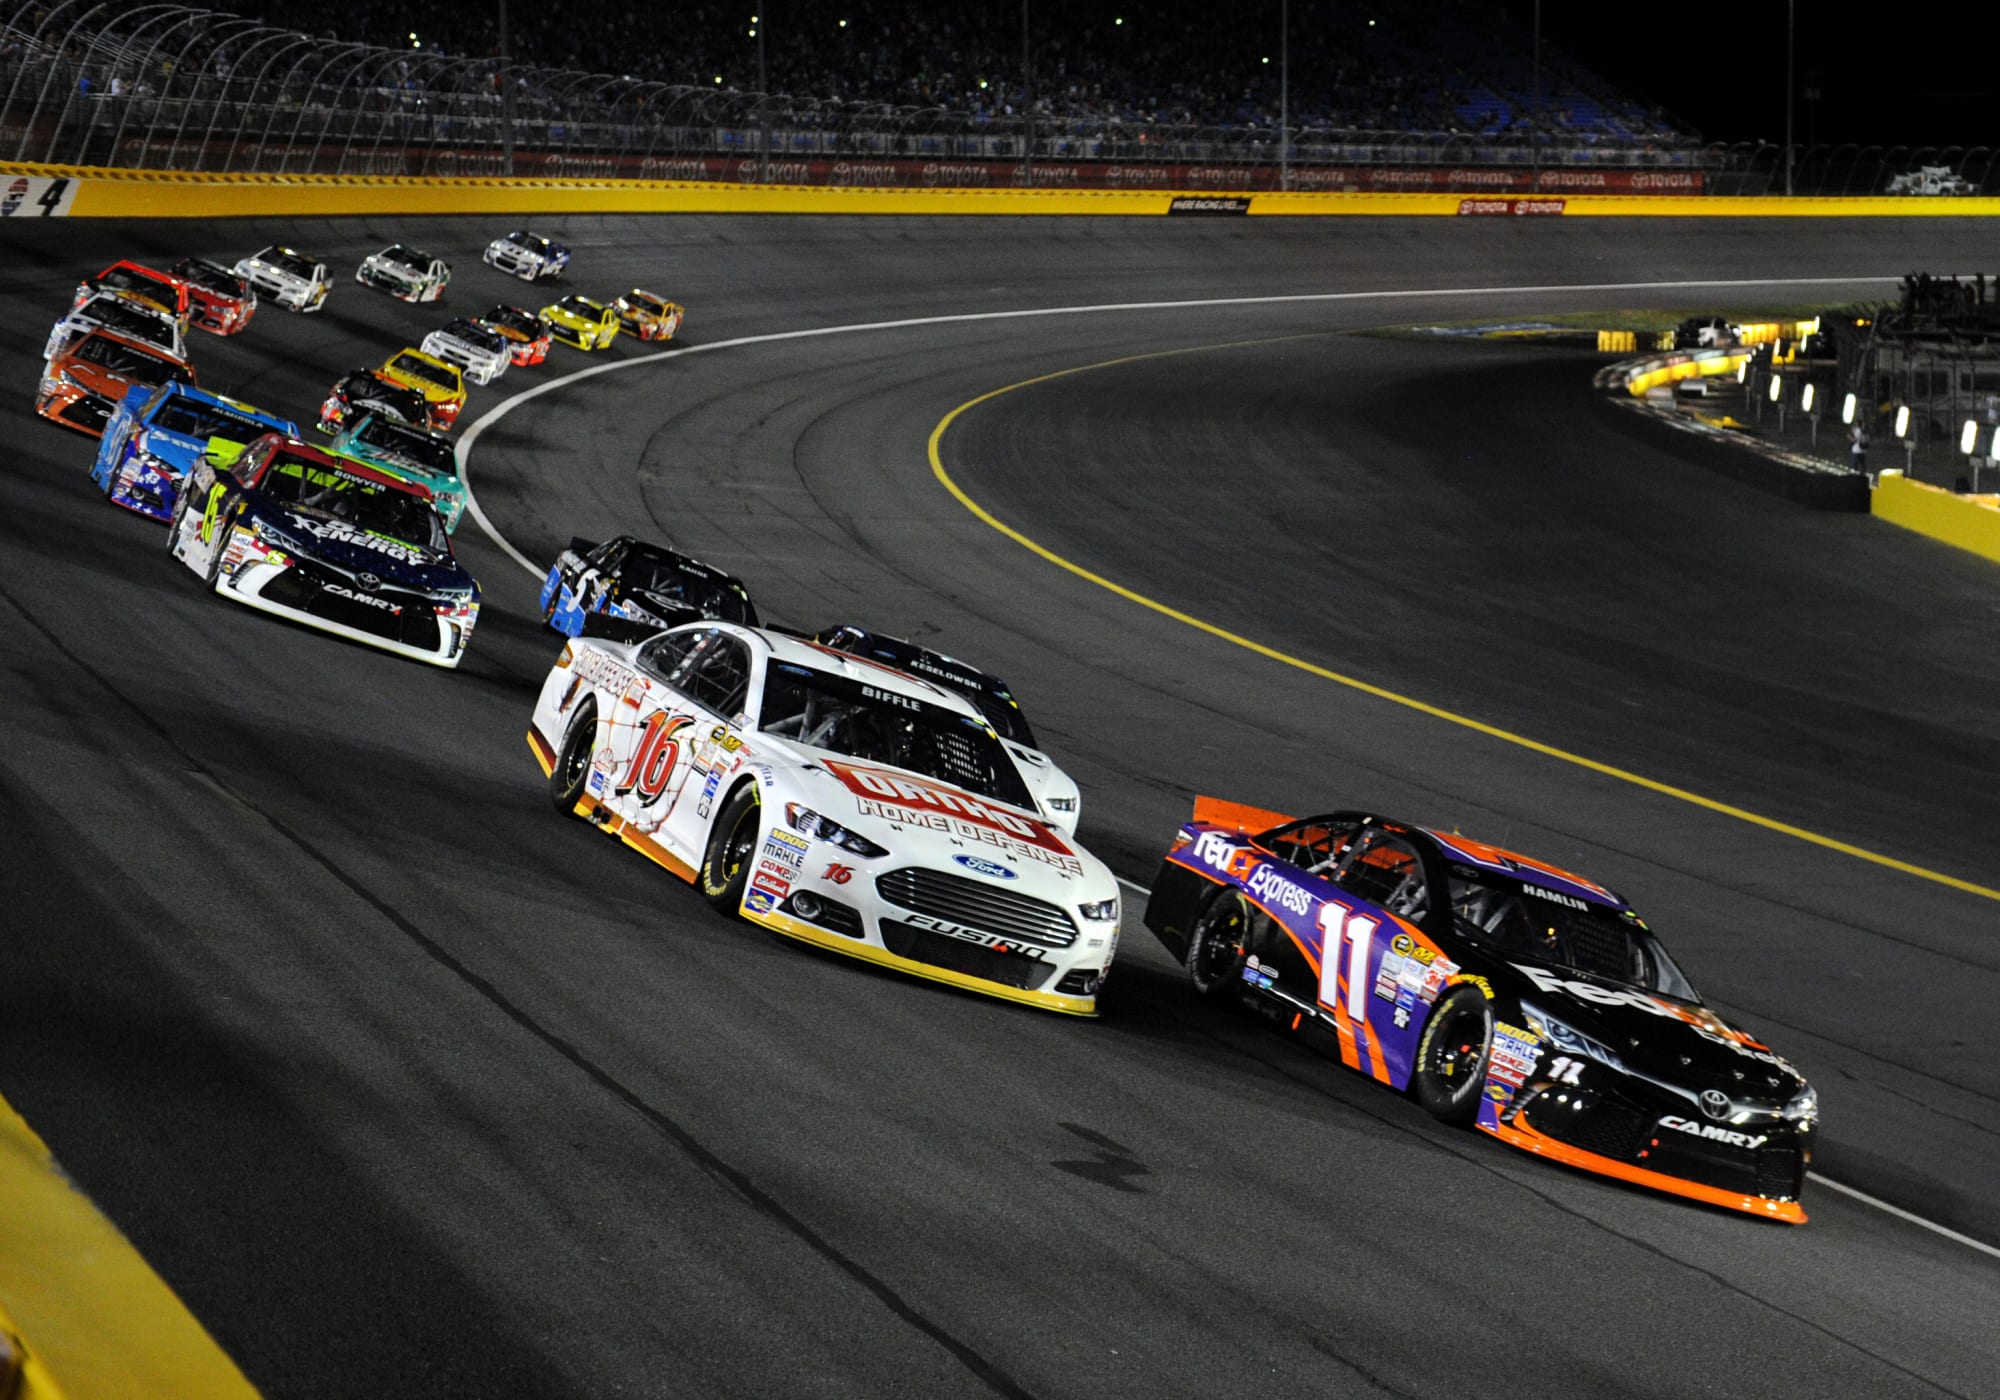 2017 NASCAR AllStar Race format Rules, number of laps and more